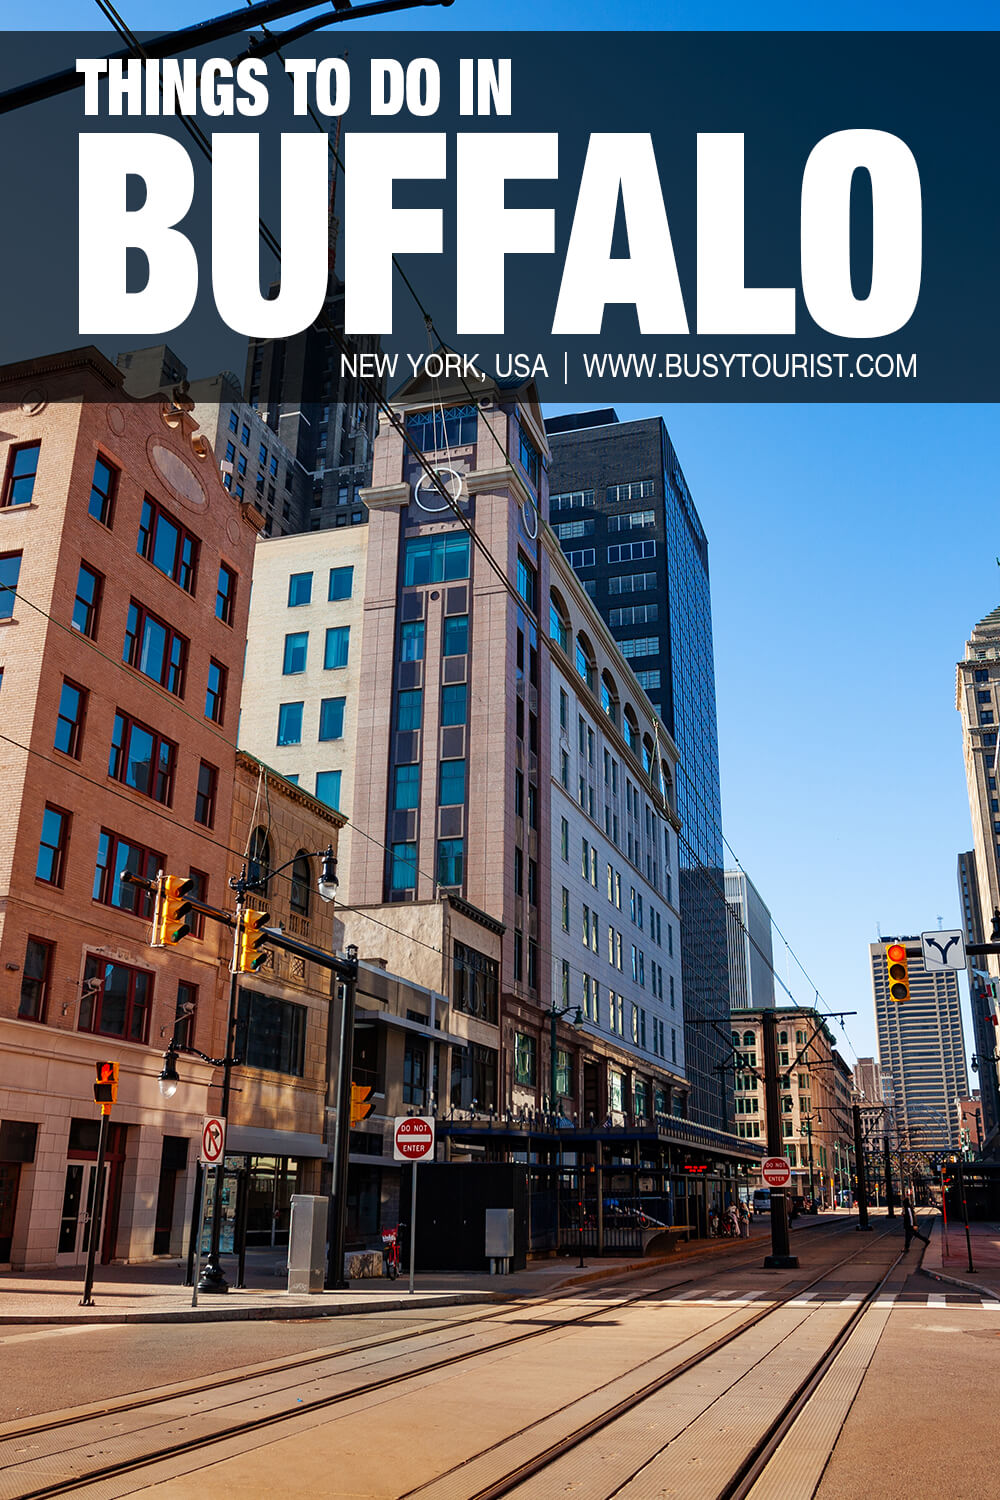 tourist attractions in buffalo